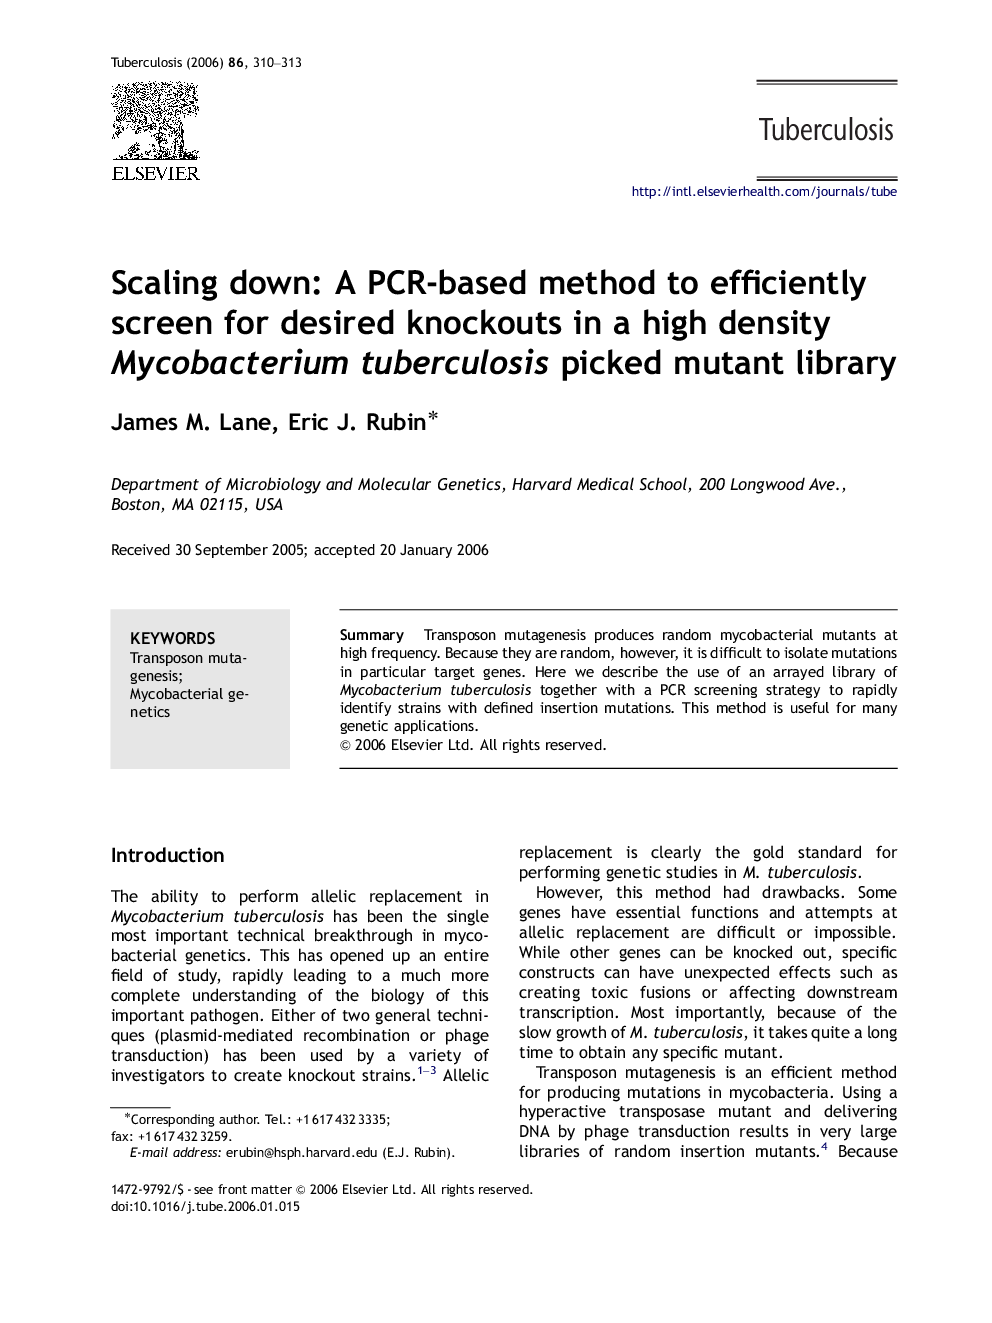 Scaling down: A PCR-based method to efficiently screen for desired knockouts in a high density Mycobacterium tuberculosis picked mutant library